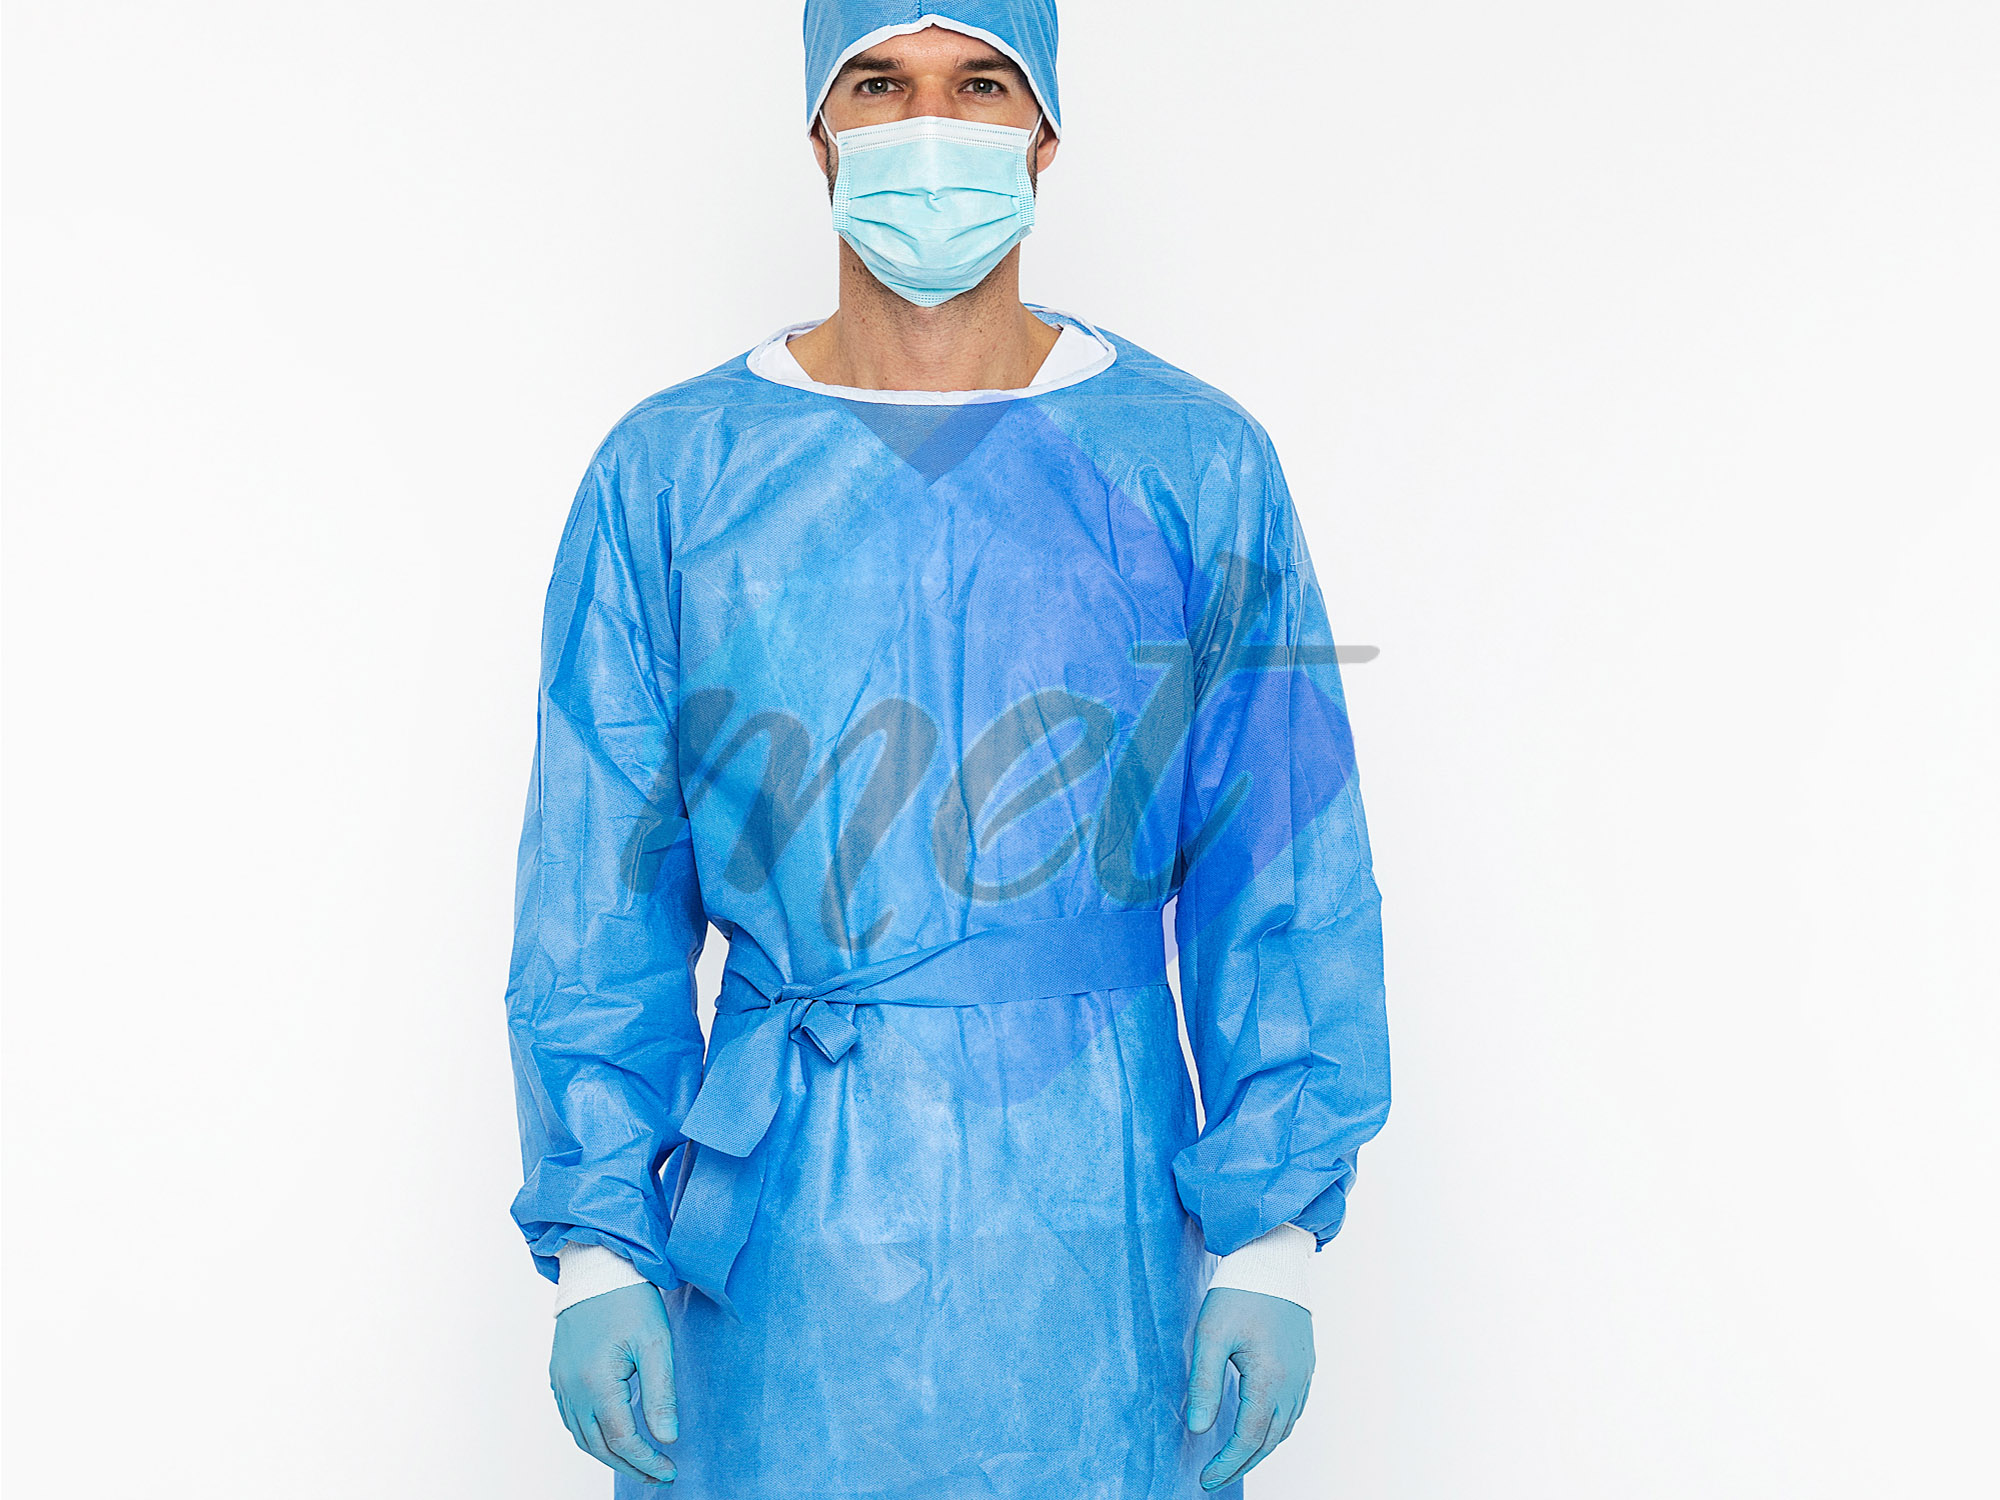 Level 1 Medical Gown